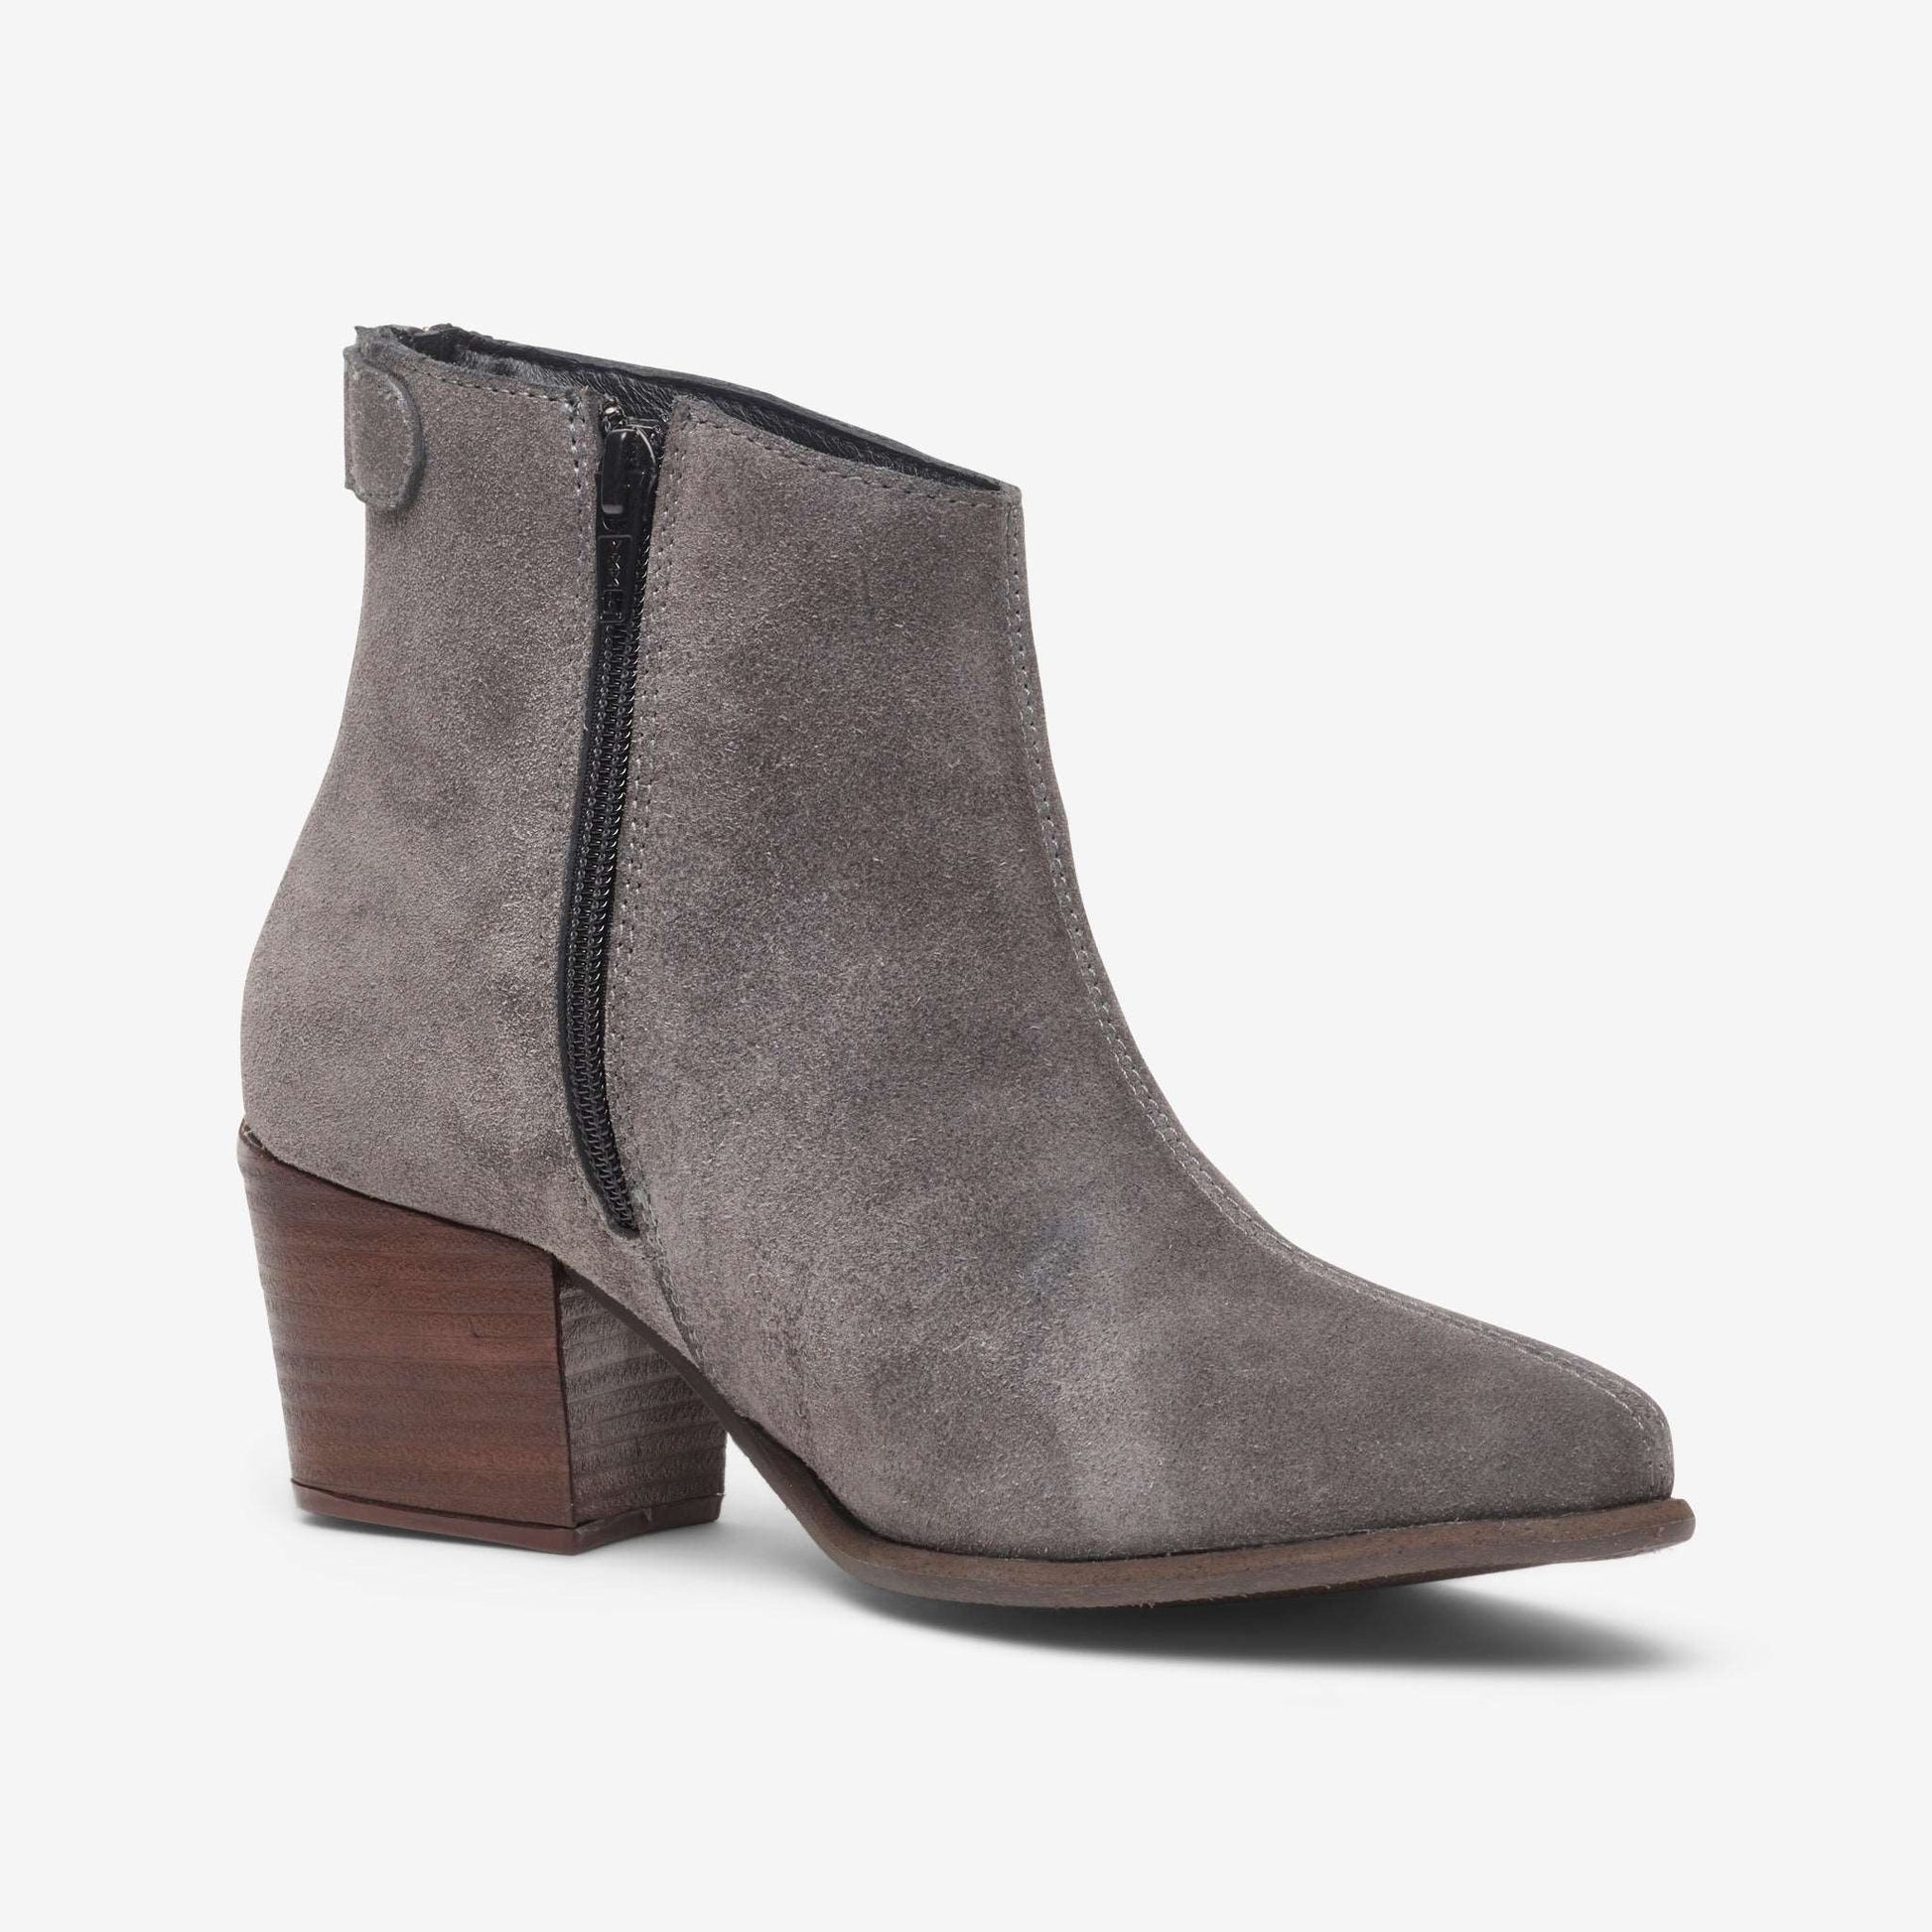 Side view of wide fit ankle boot with block heels in grey suede